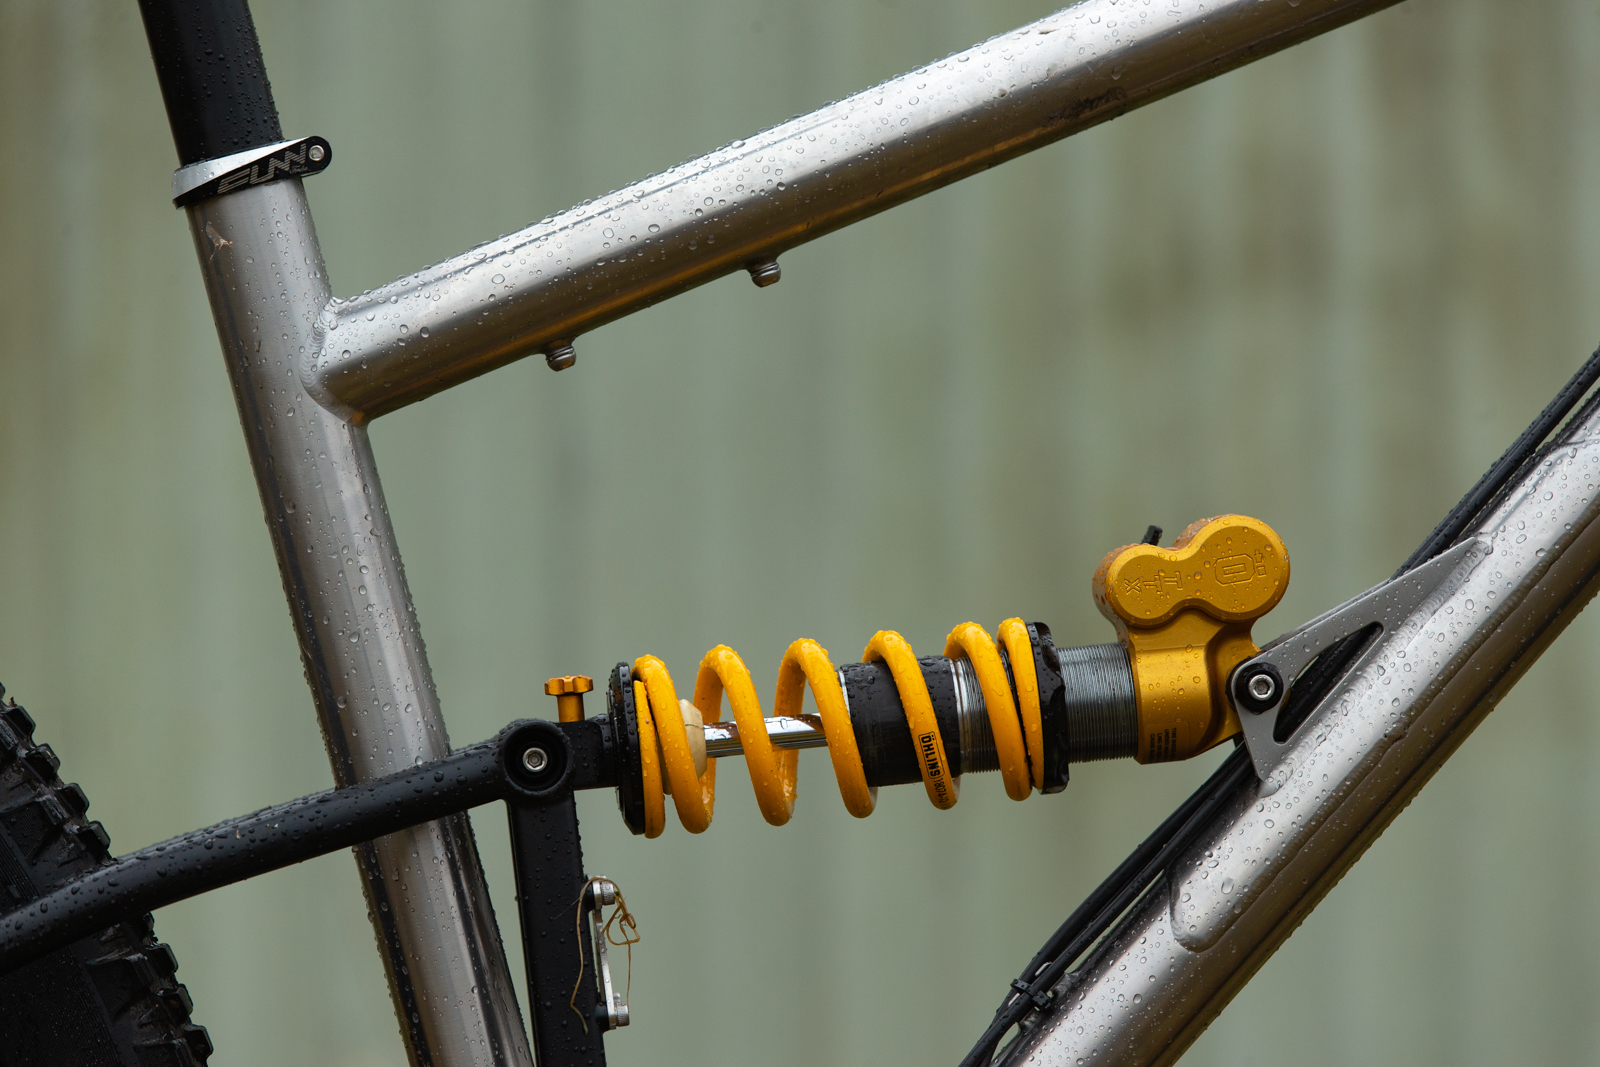 Starling Cycles Limited Edition Stainless Murmur - The 